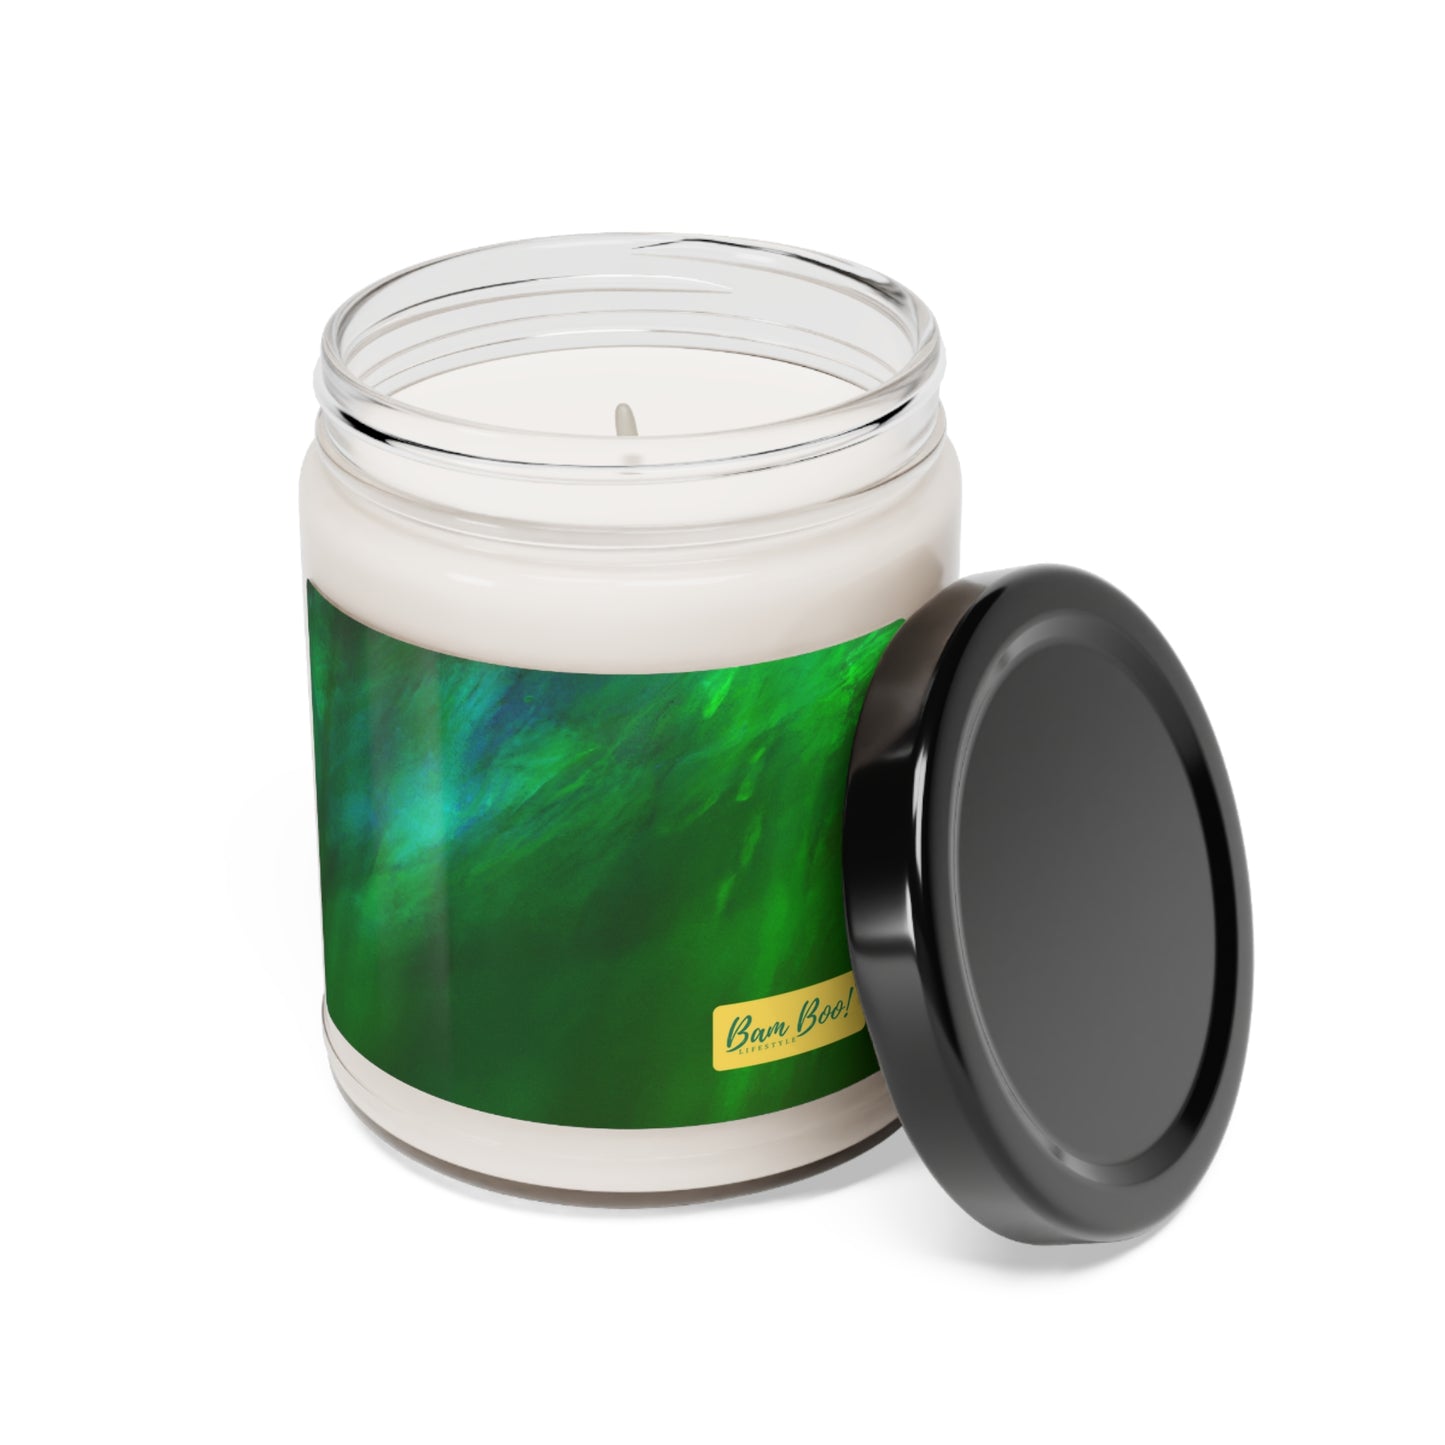 "Capturing Nature's Light and Texture" - Bam Boo! Lifestyle Eco-friendly Soy Candle